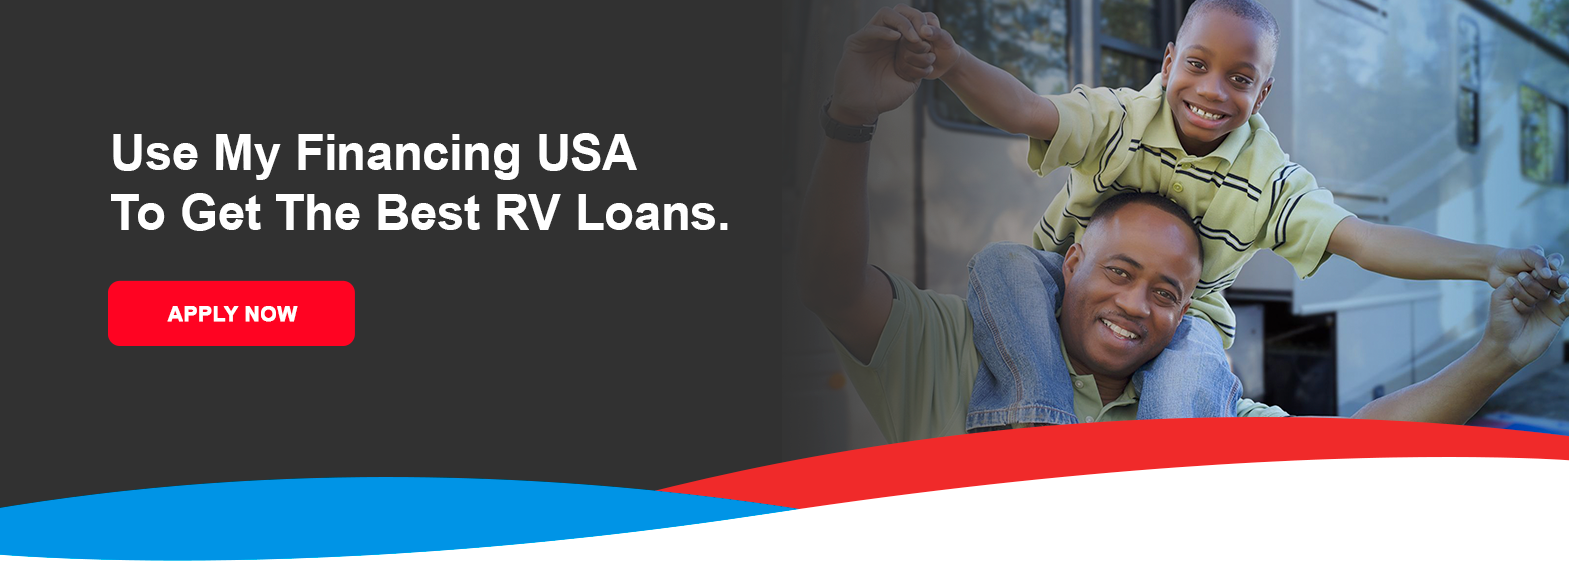 Use My Financing USA to get the best RV loans. Apply now!

